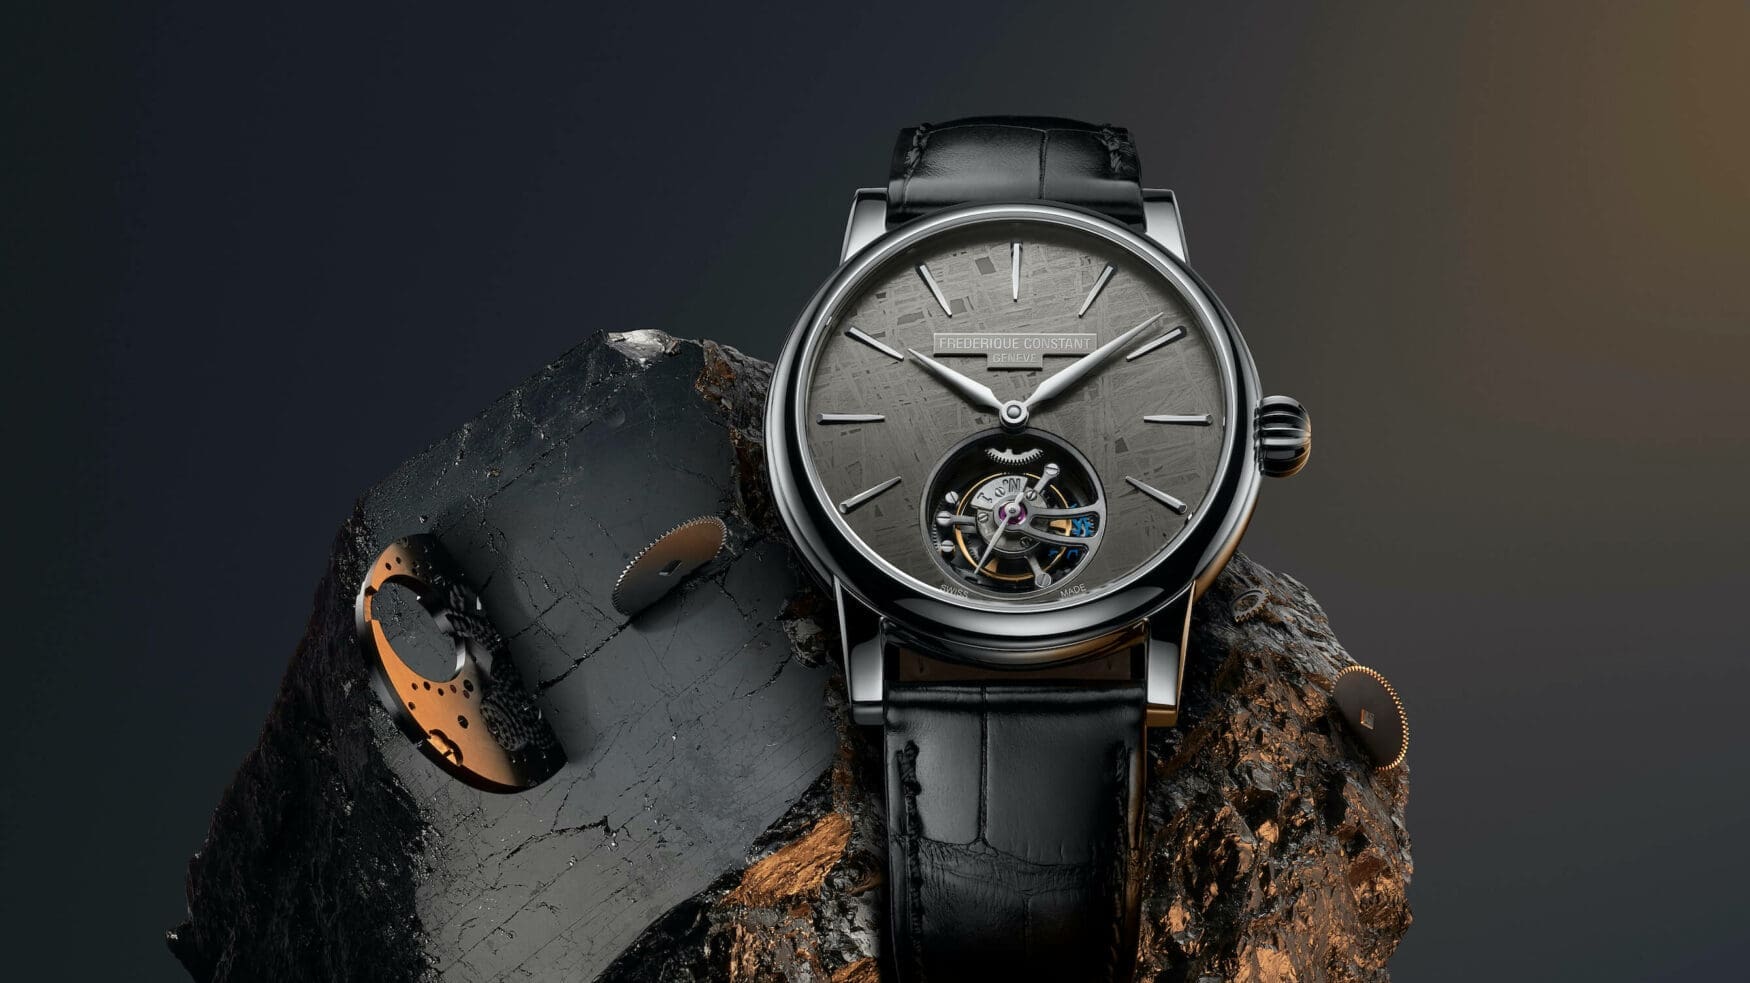 This Frederique Constant Classic Tourbillon Meteorite Manufacture has their first-ever entirely hand-decorated movement